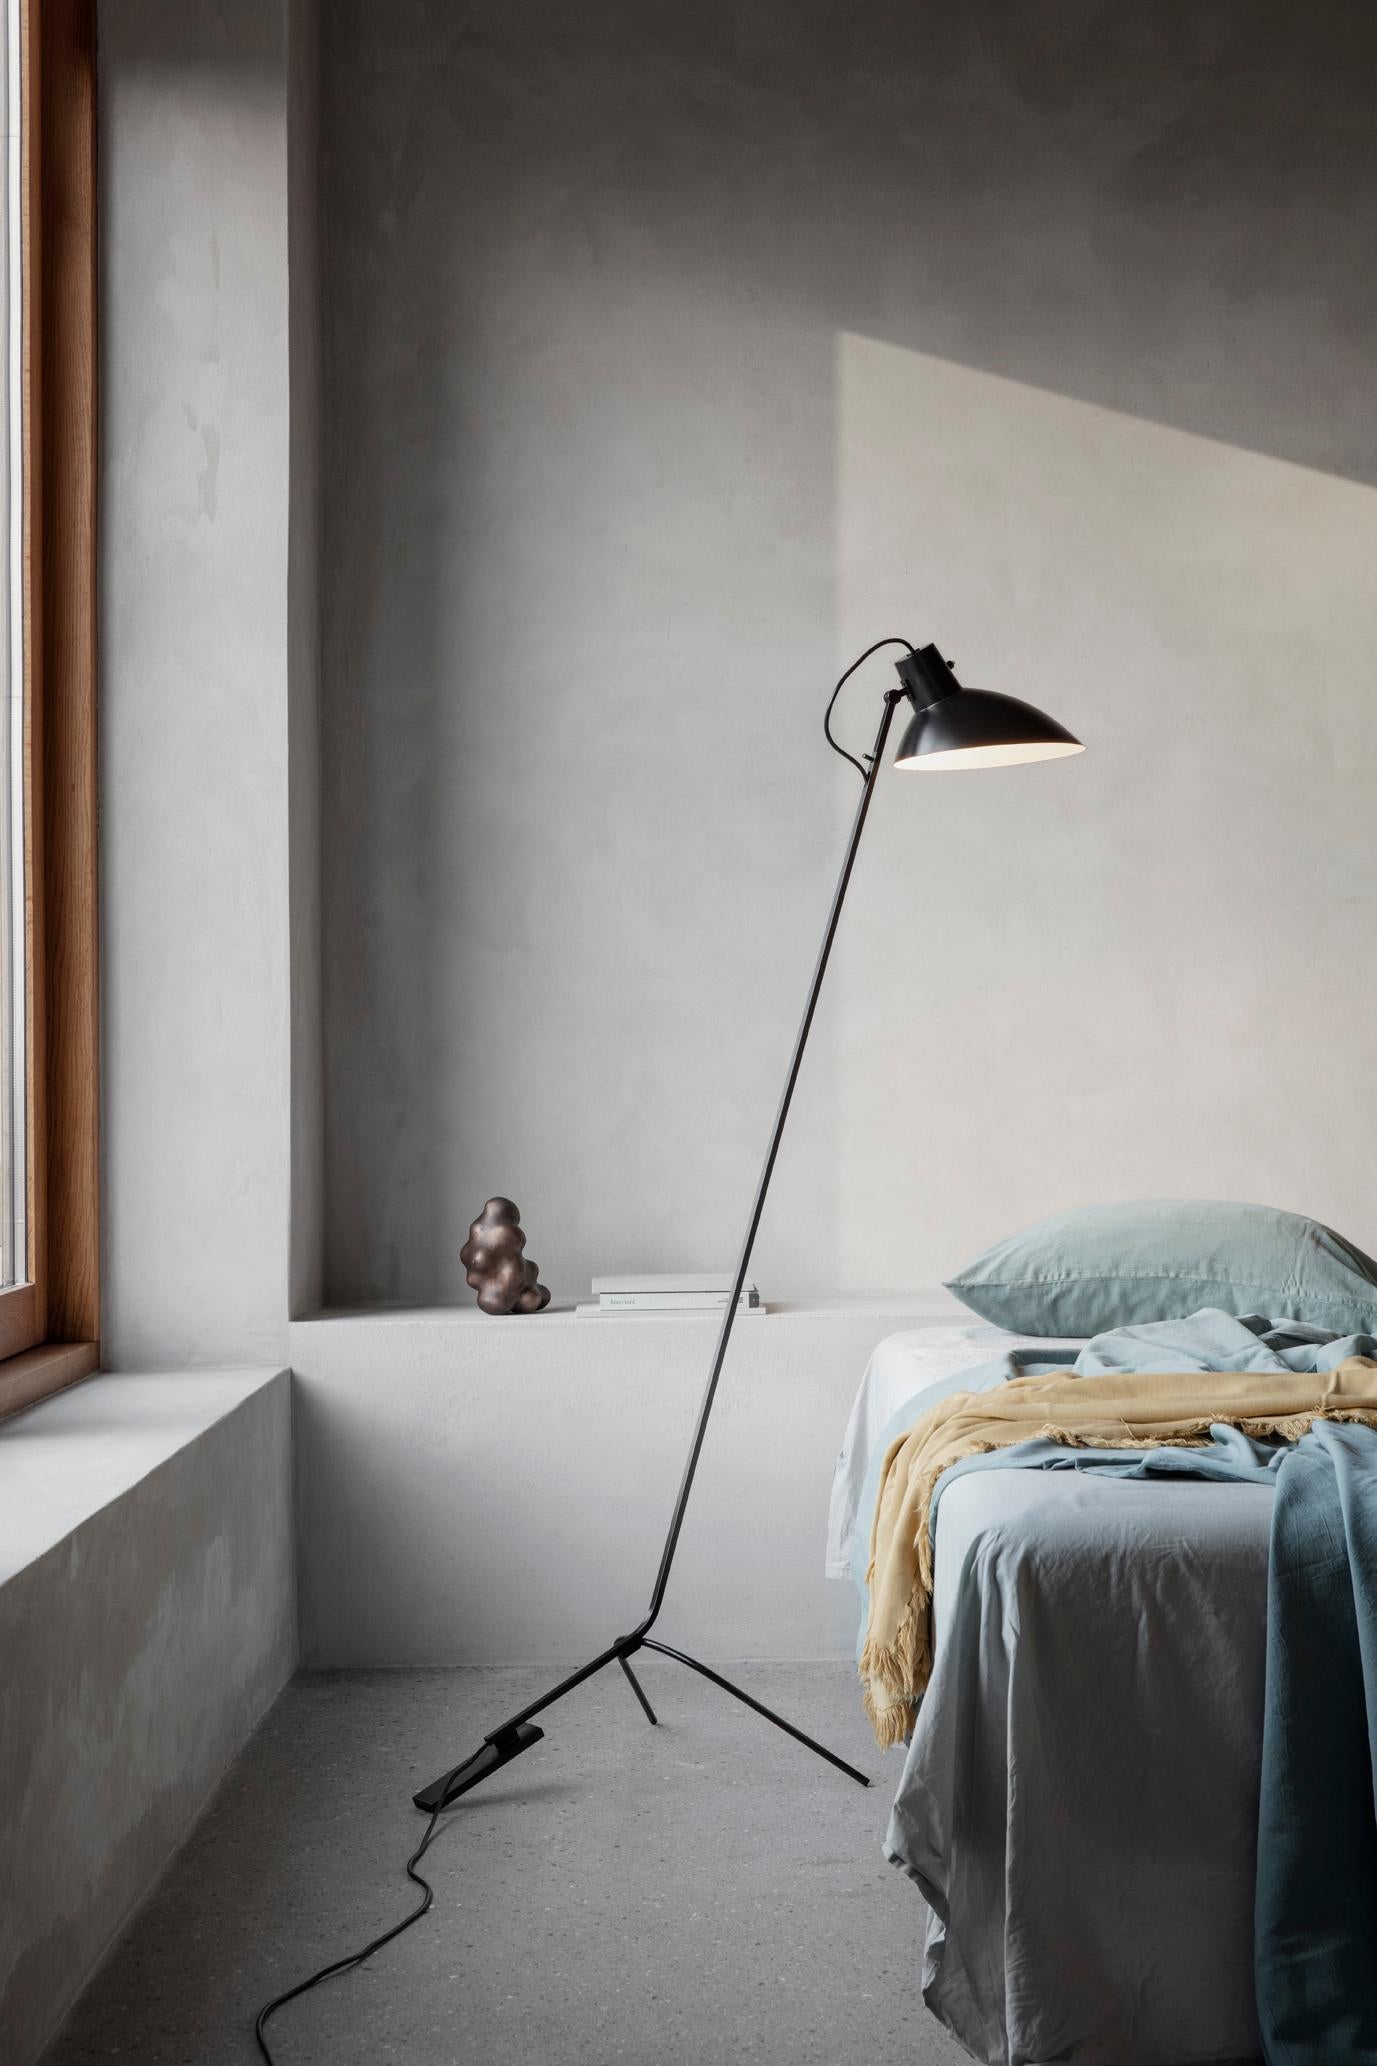 VV Cinquanta White and Brass Floor Lamp Designed by Vittoriano Viganò for Astep 2